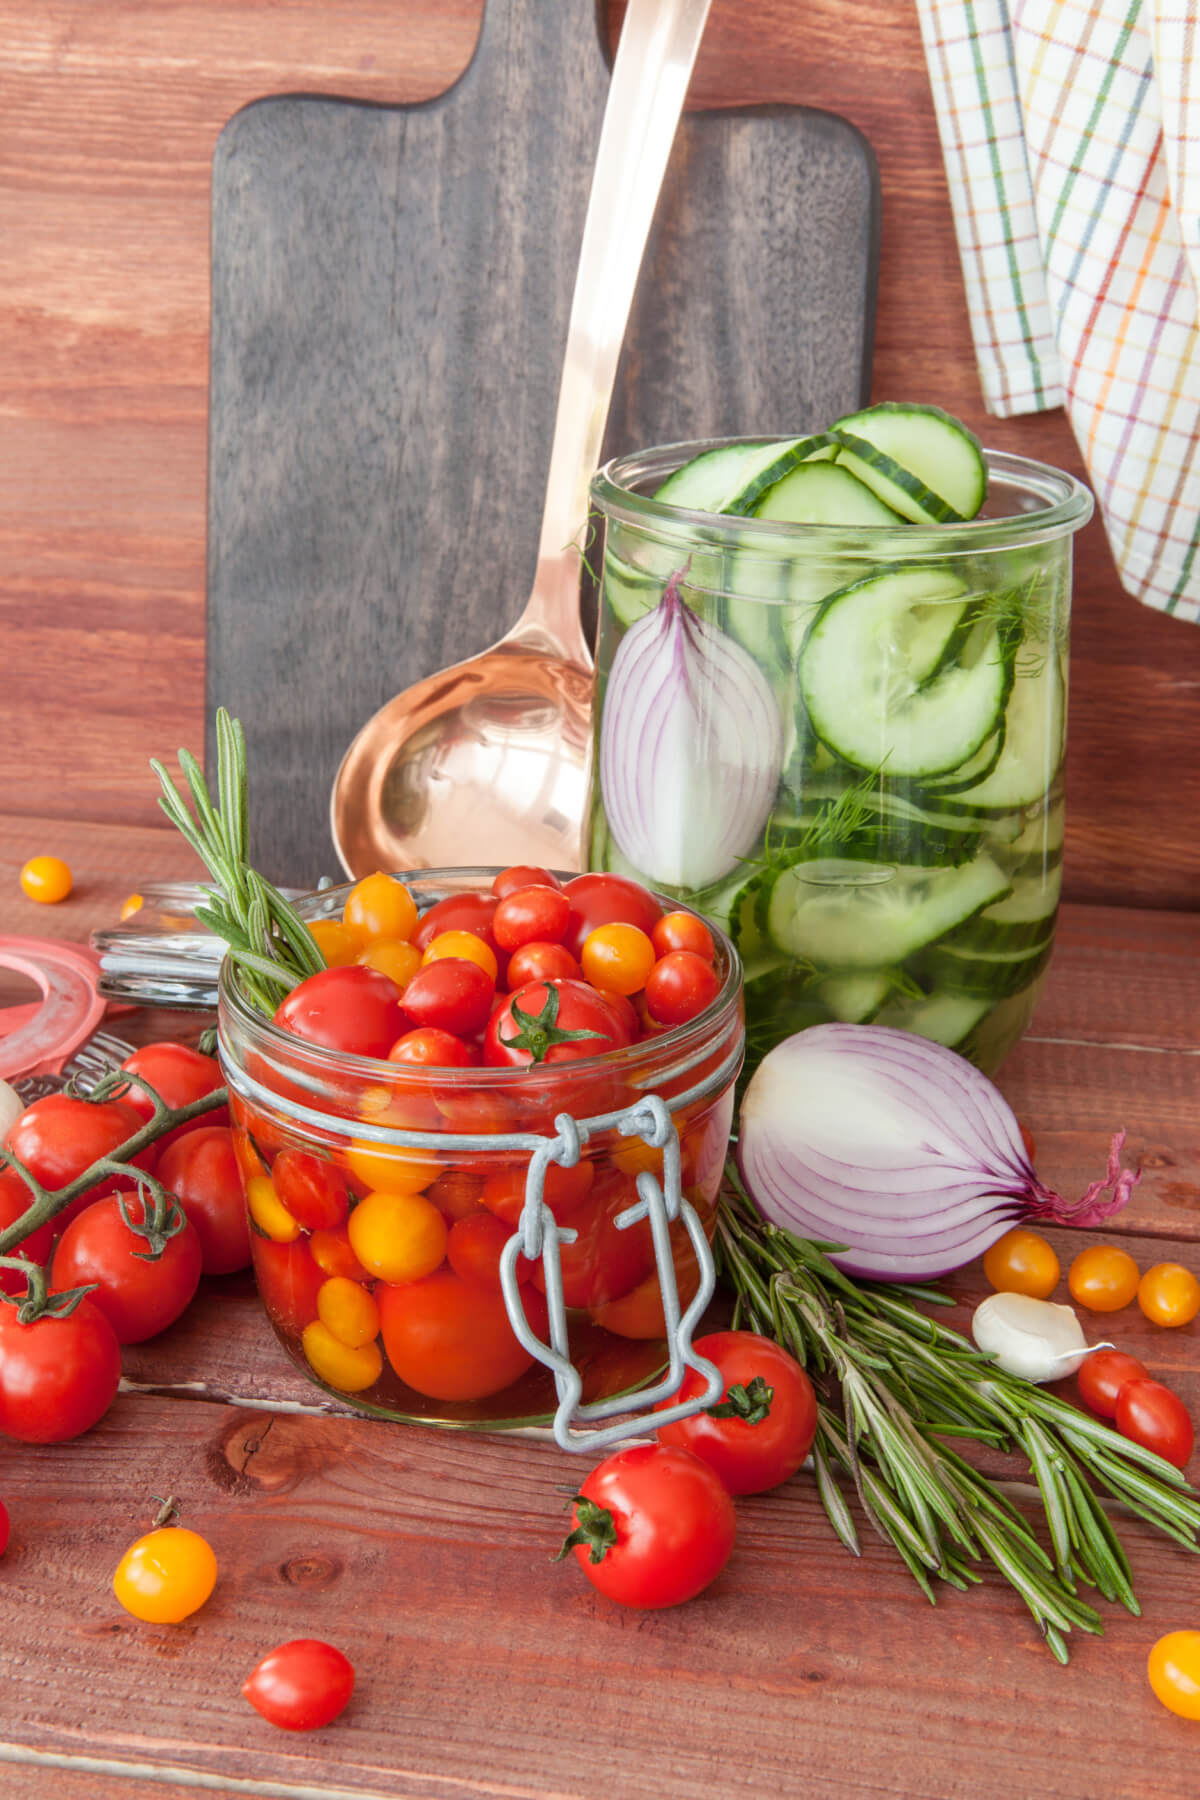 In how I learned to live frugally, planting a garden with vegetables and fruit for food is always less money than the grocery store. Then you might think about canning the food.